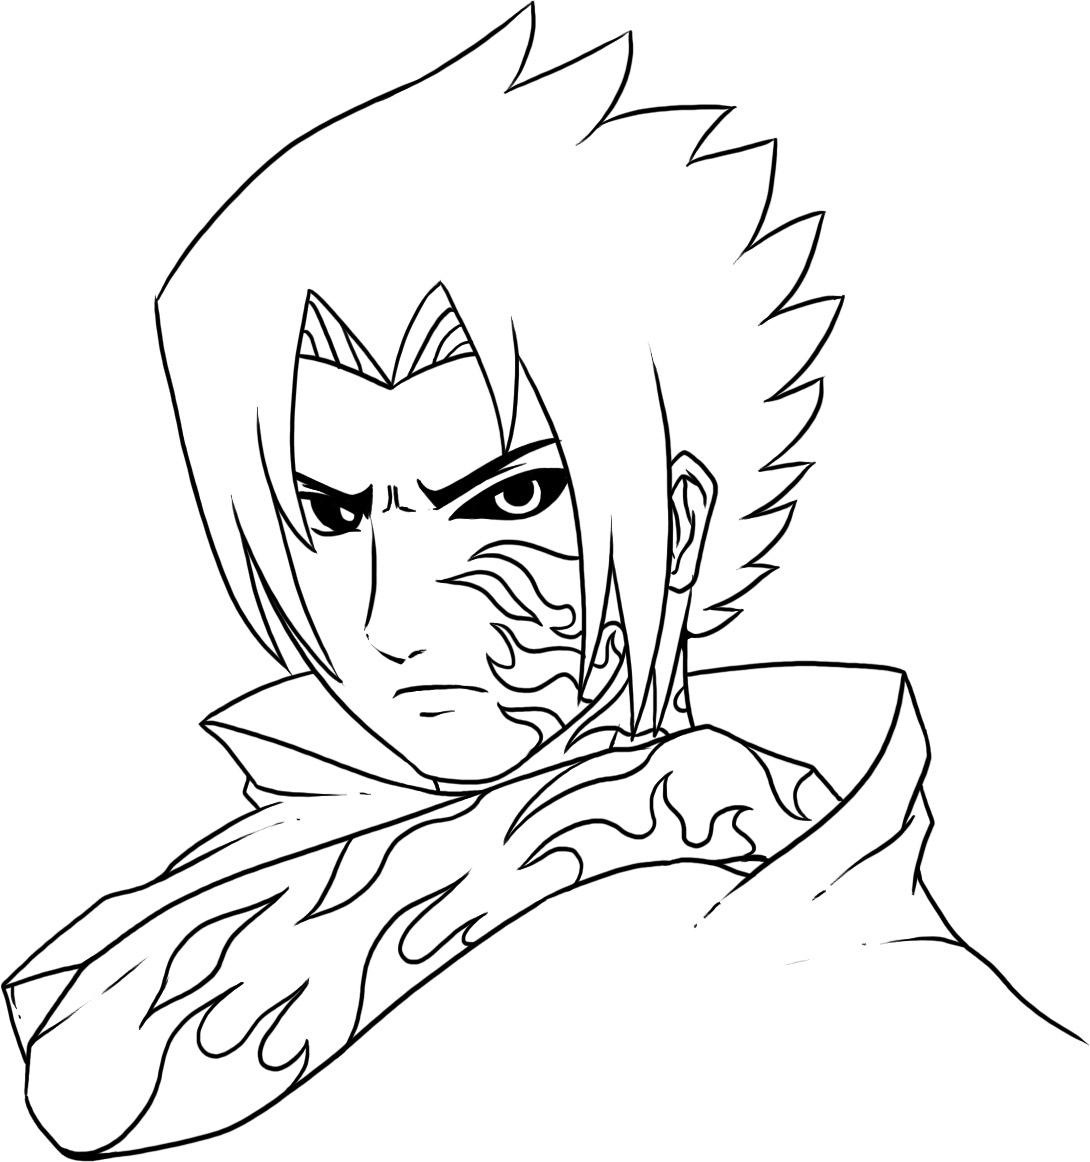 Anime Naruto Coloring Pages Free Printable Naruto Coloring Pages For Kids